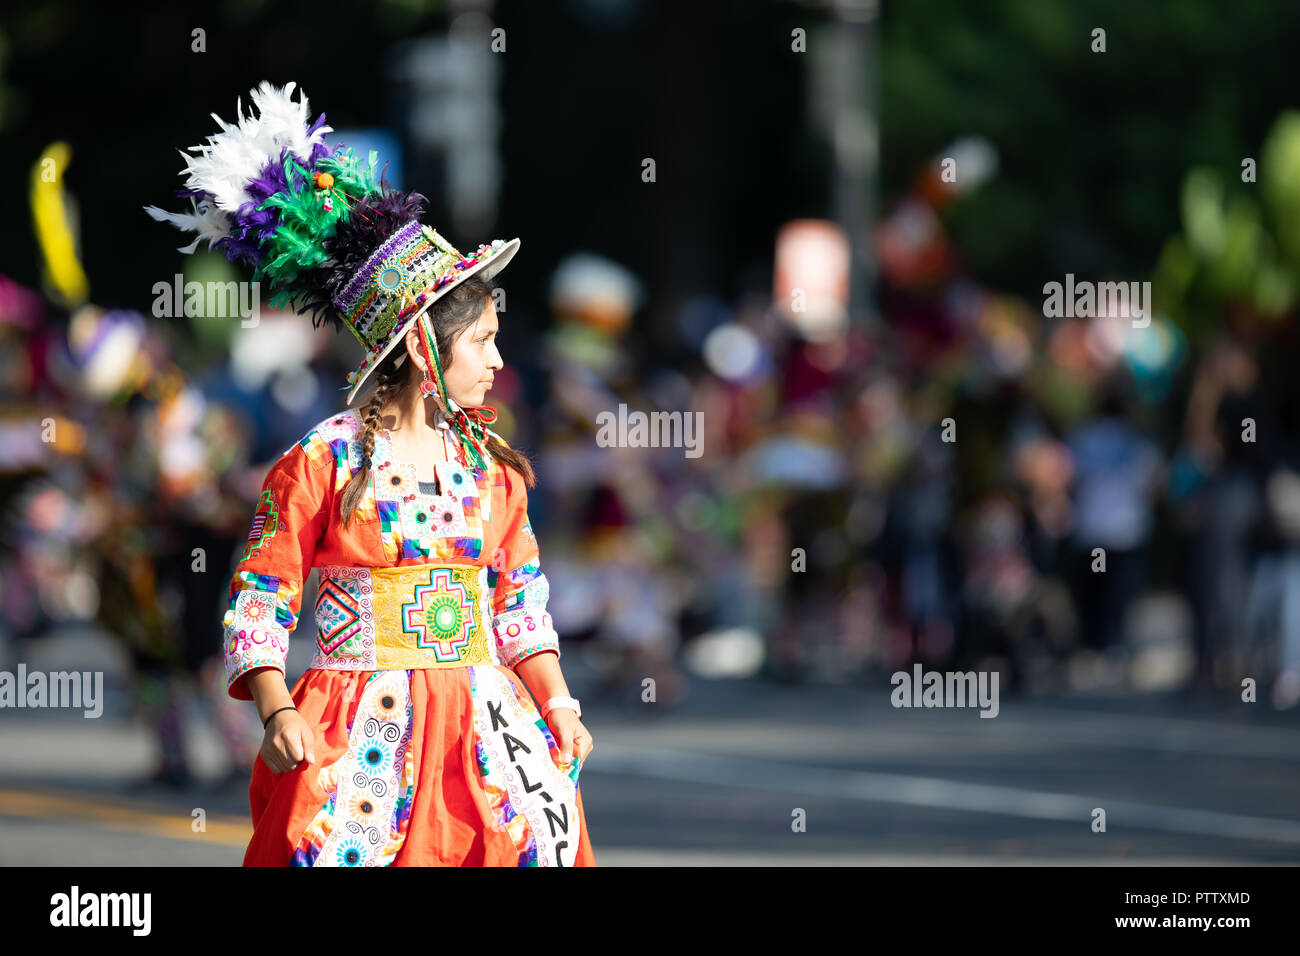 Washington, D.C., USA - September 29, 2018: The Fiesta DC Parade, Young Bolivian girl wearing traditional clothing going down the street during the pa Stock Photo